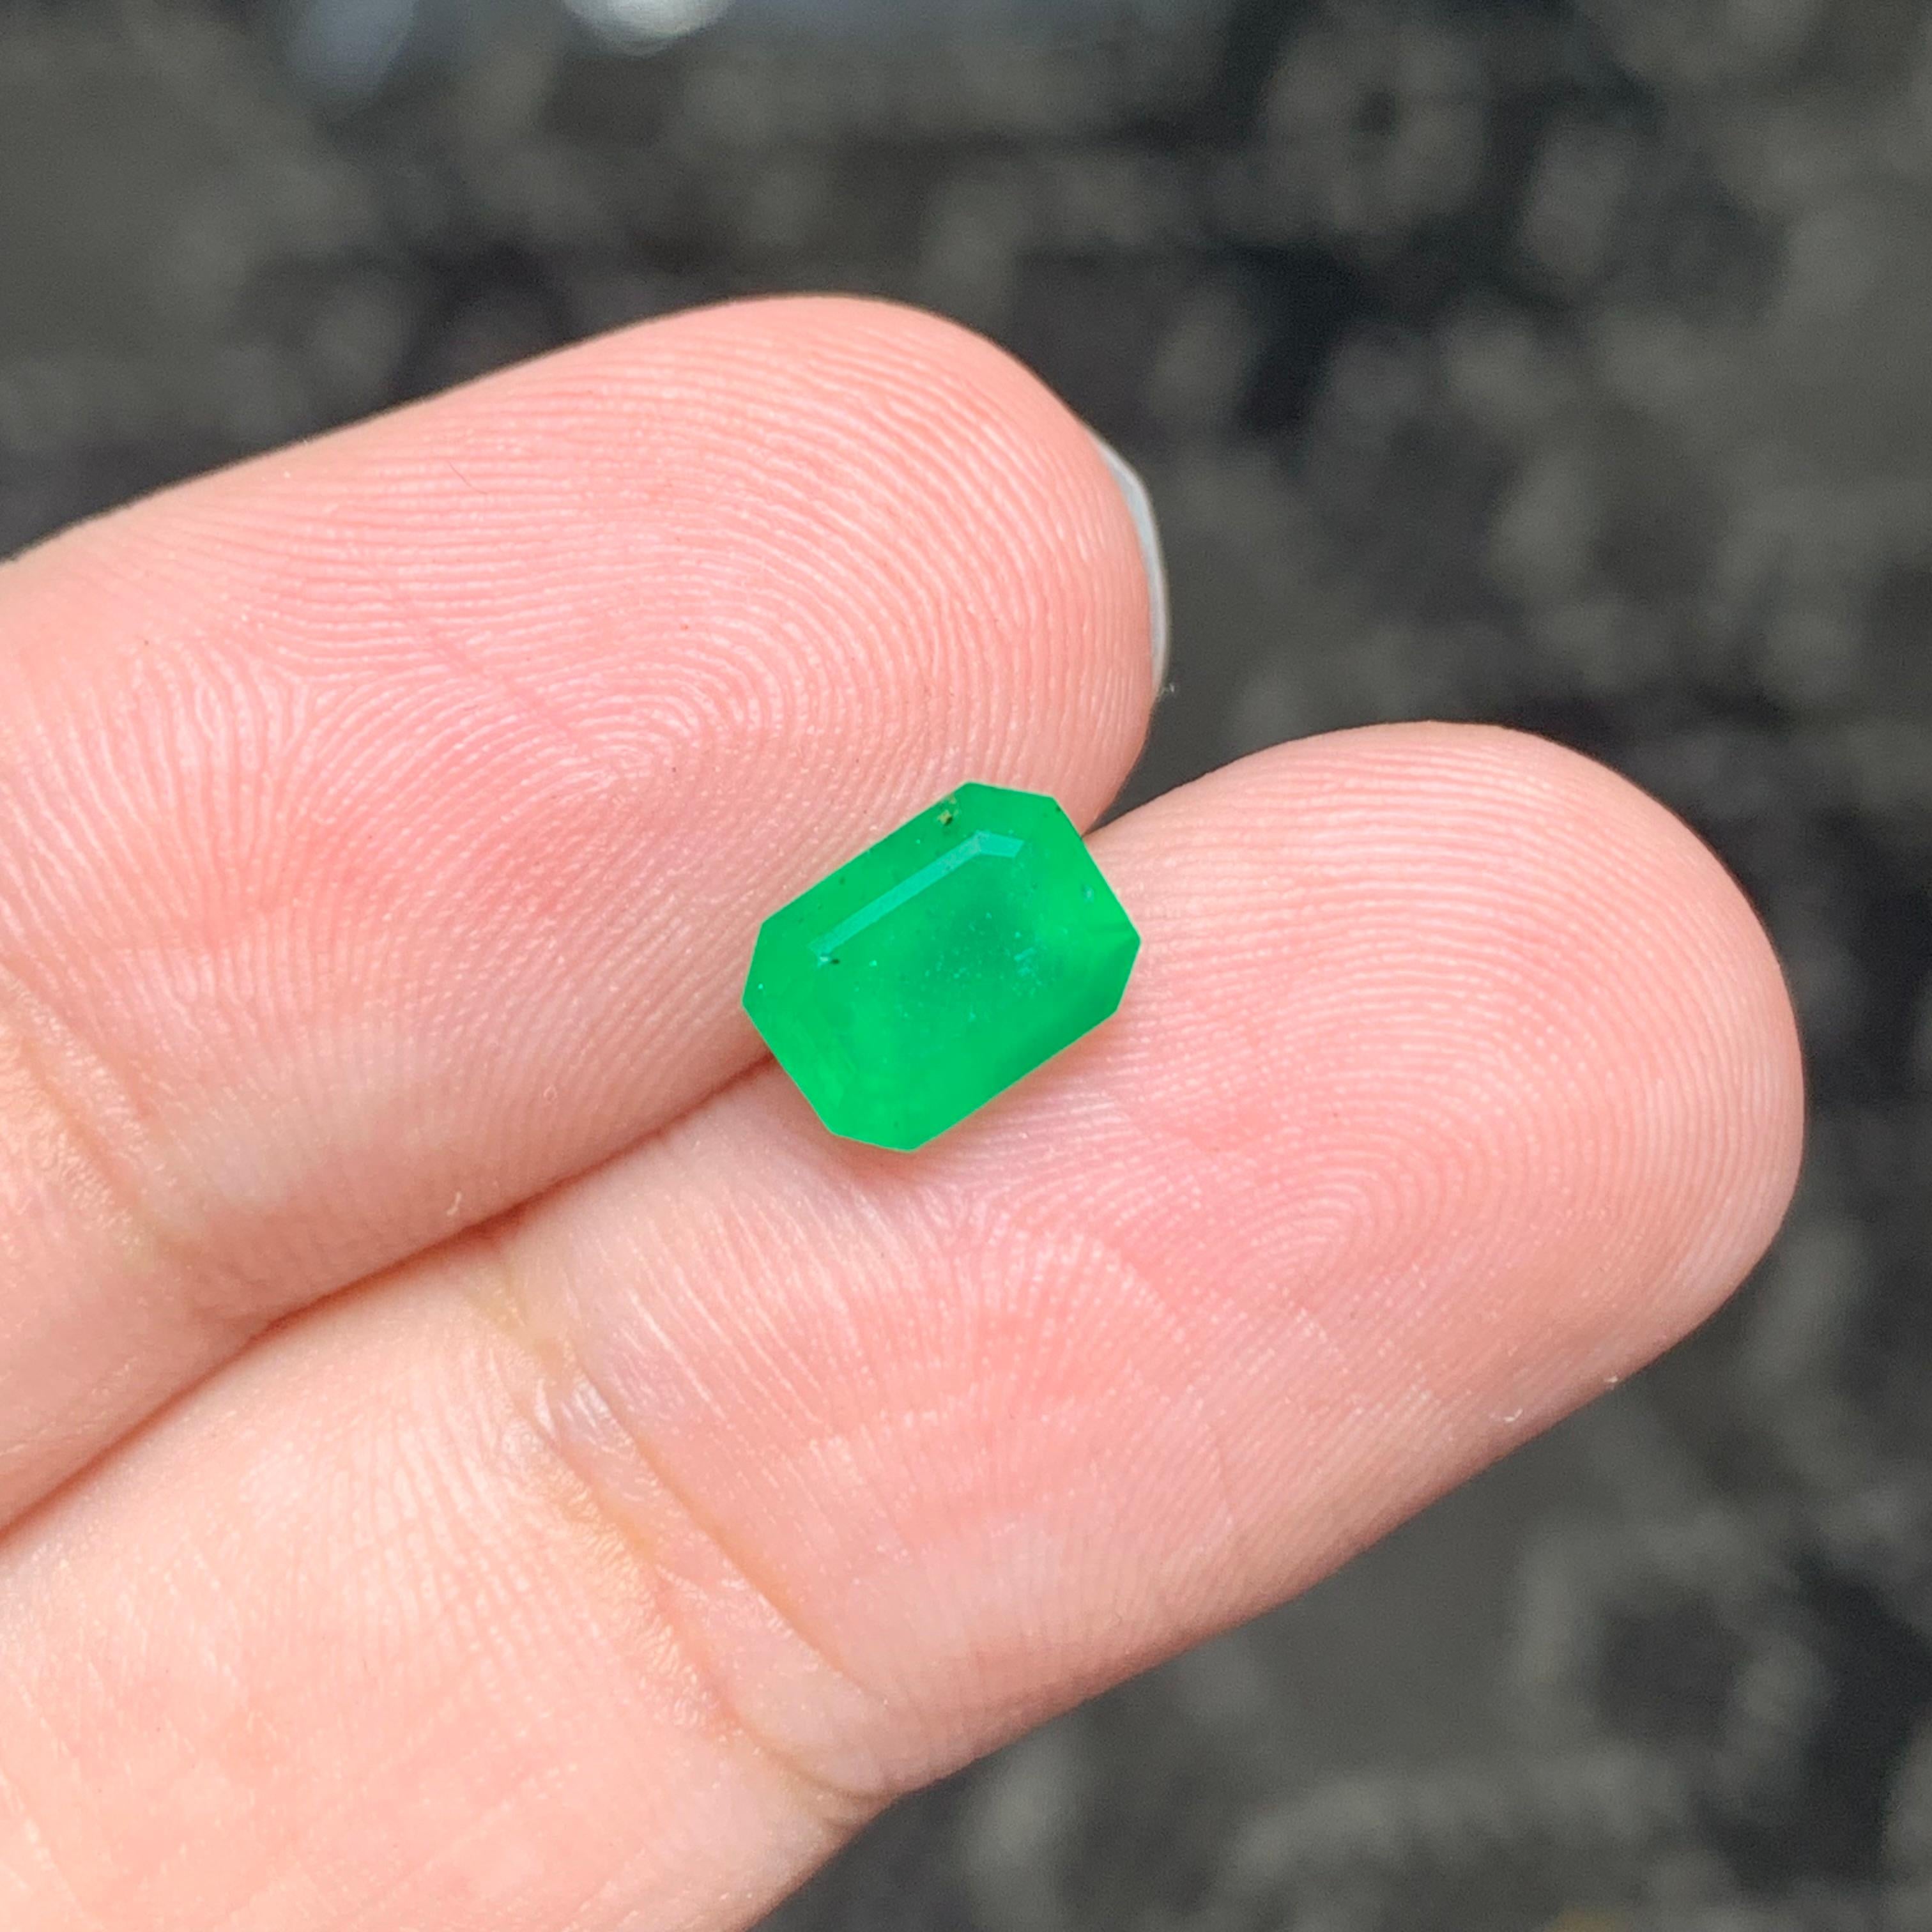 Loose Emerald
Weight: 1.45 Carat
Dimension: 7.4 x 5.5 x 4.9 Mm
Origin: Swat, Pakistan
Treatment: Non
Certificate: On Demand
Shape: Emerald


Emerald, with its lush green hue, has captivated hearts and minds for centuries. Renowned for its stunning